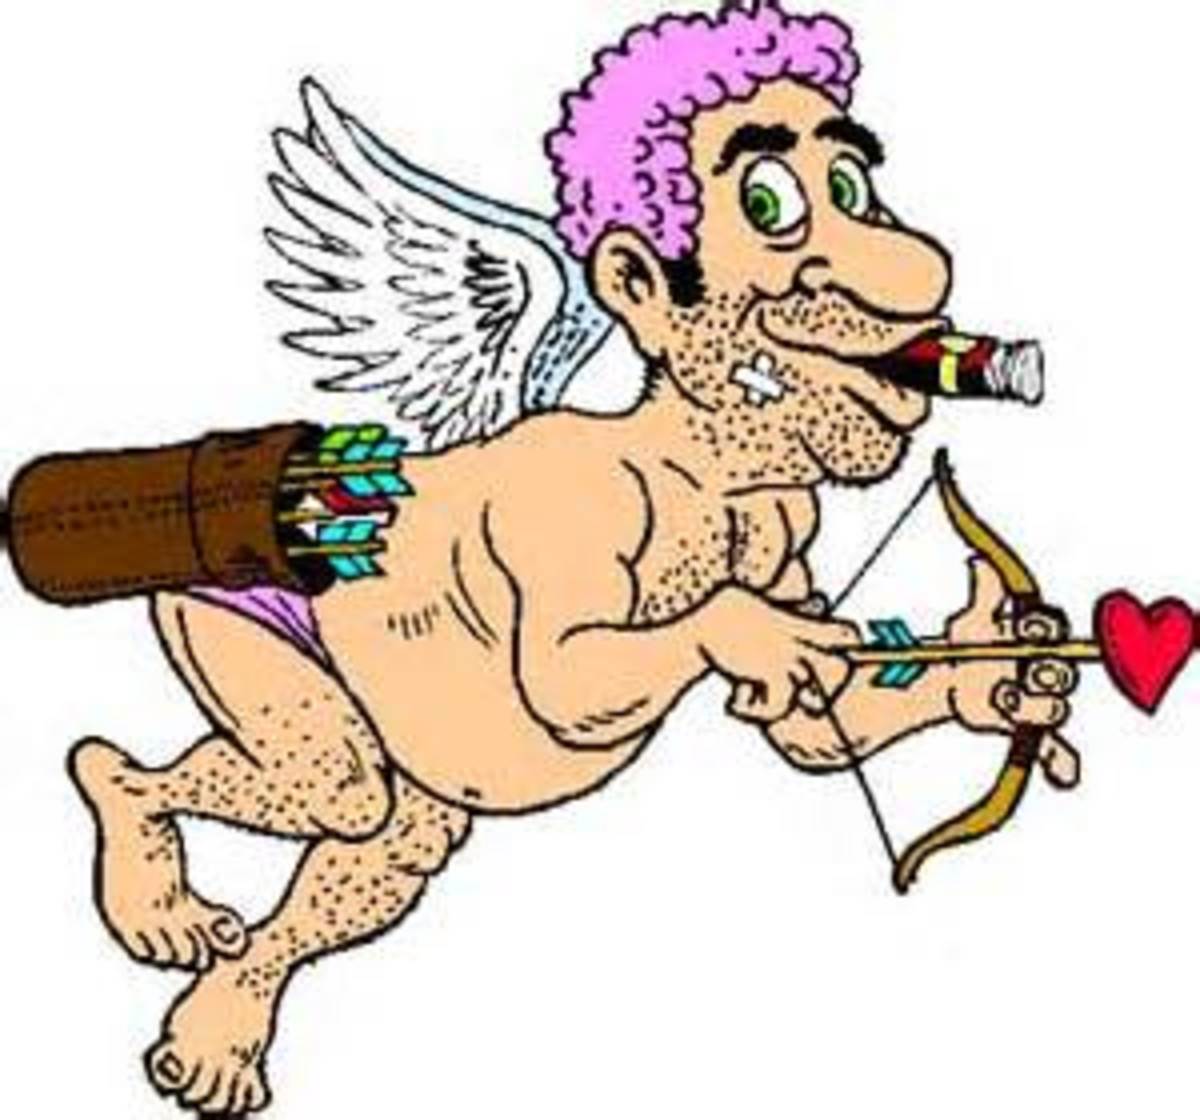 Love was in the air and it stirred Cupid from his drunken stupor. 